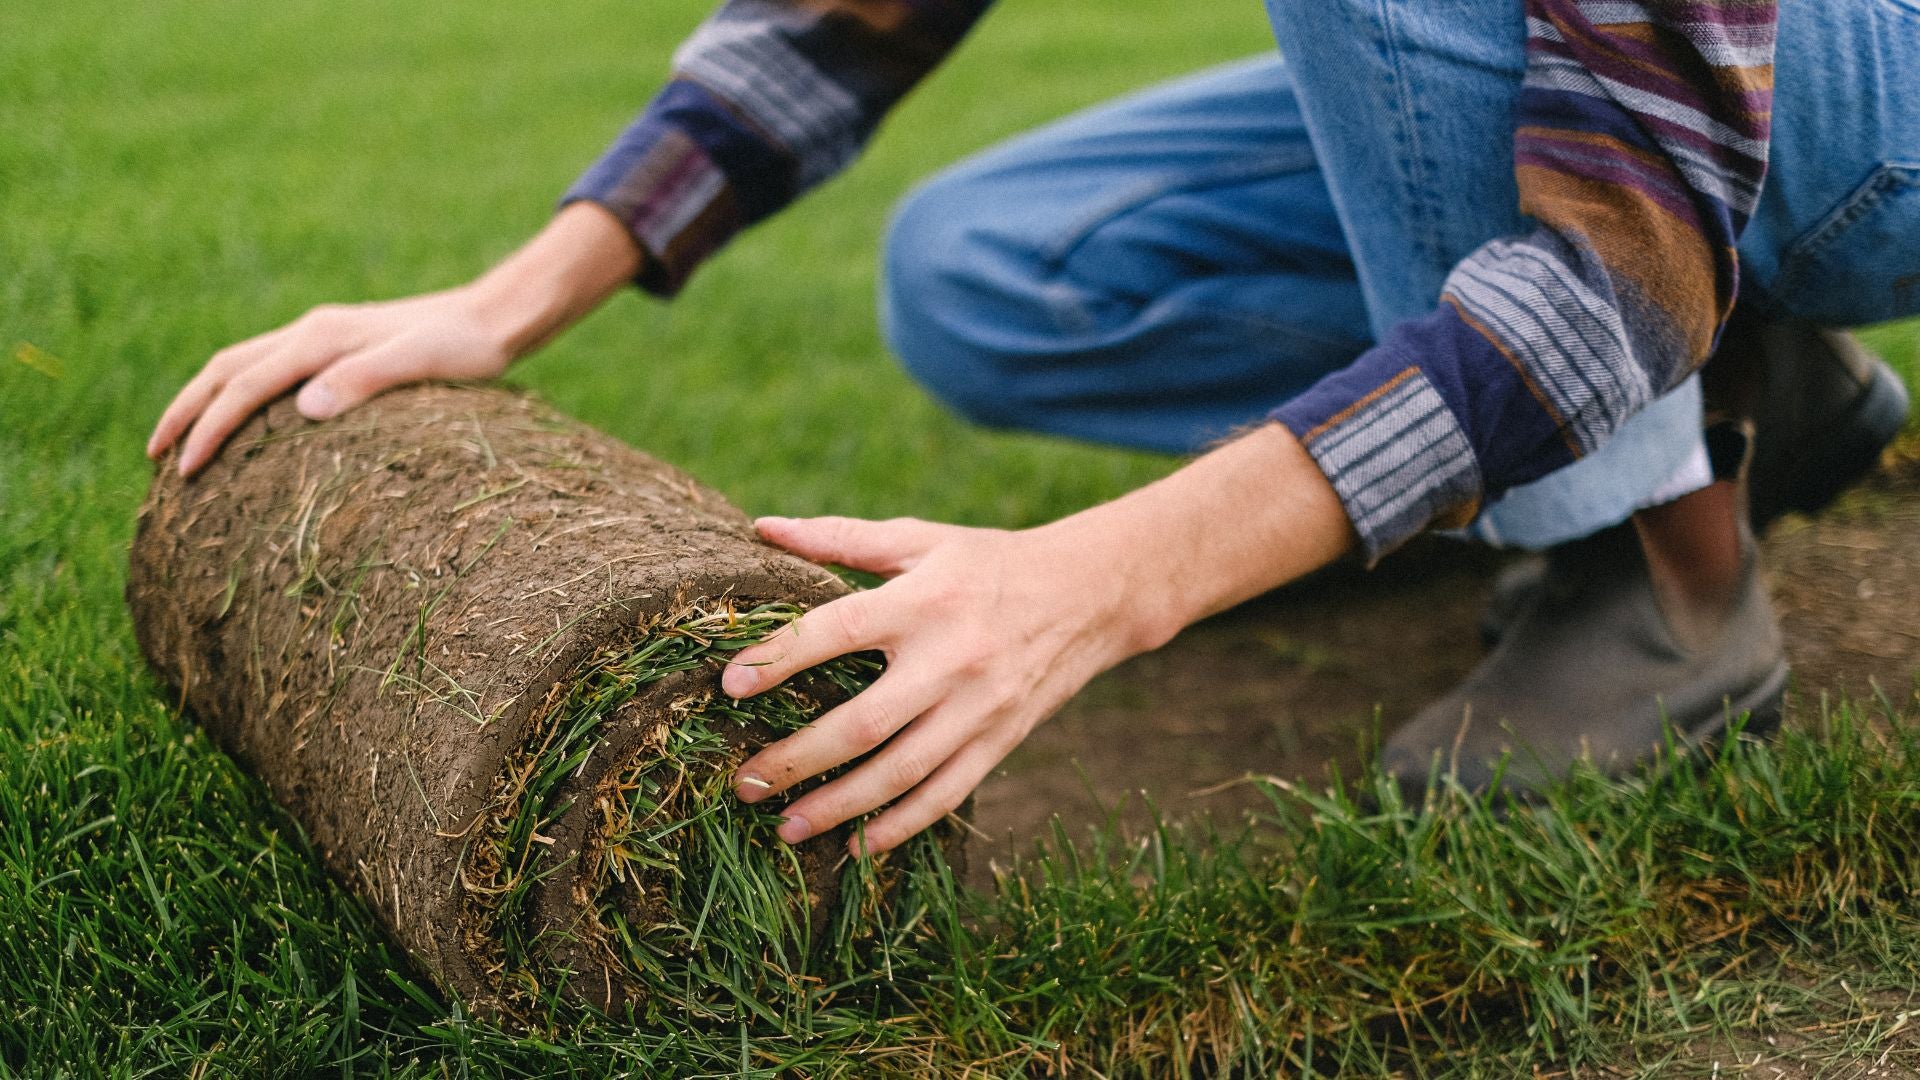 How To Install Turf Grass: Step-by-step Guide